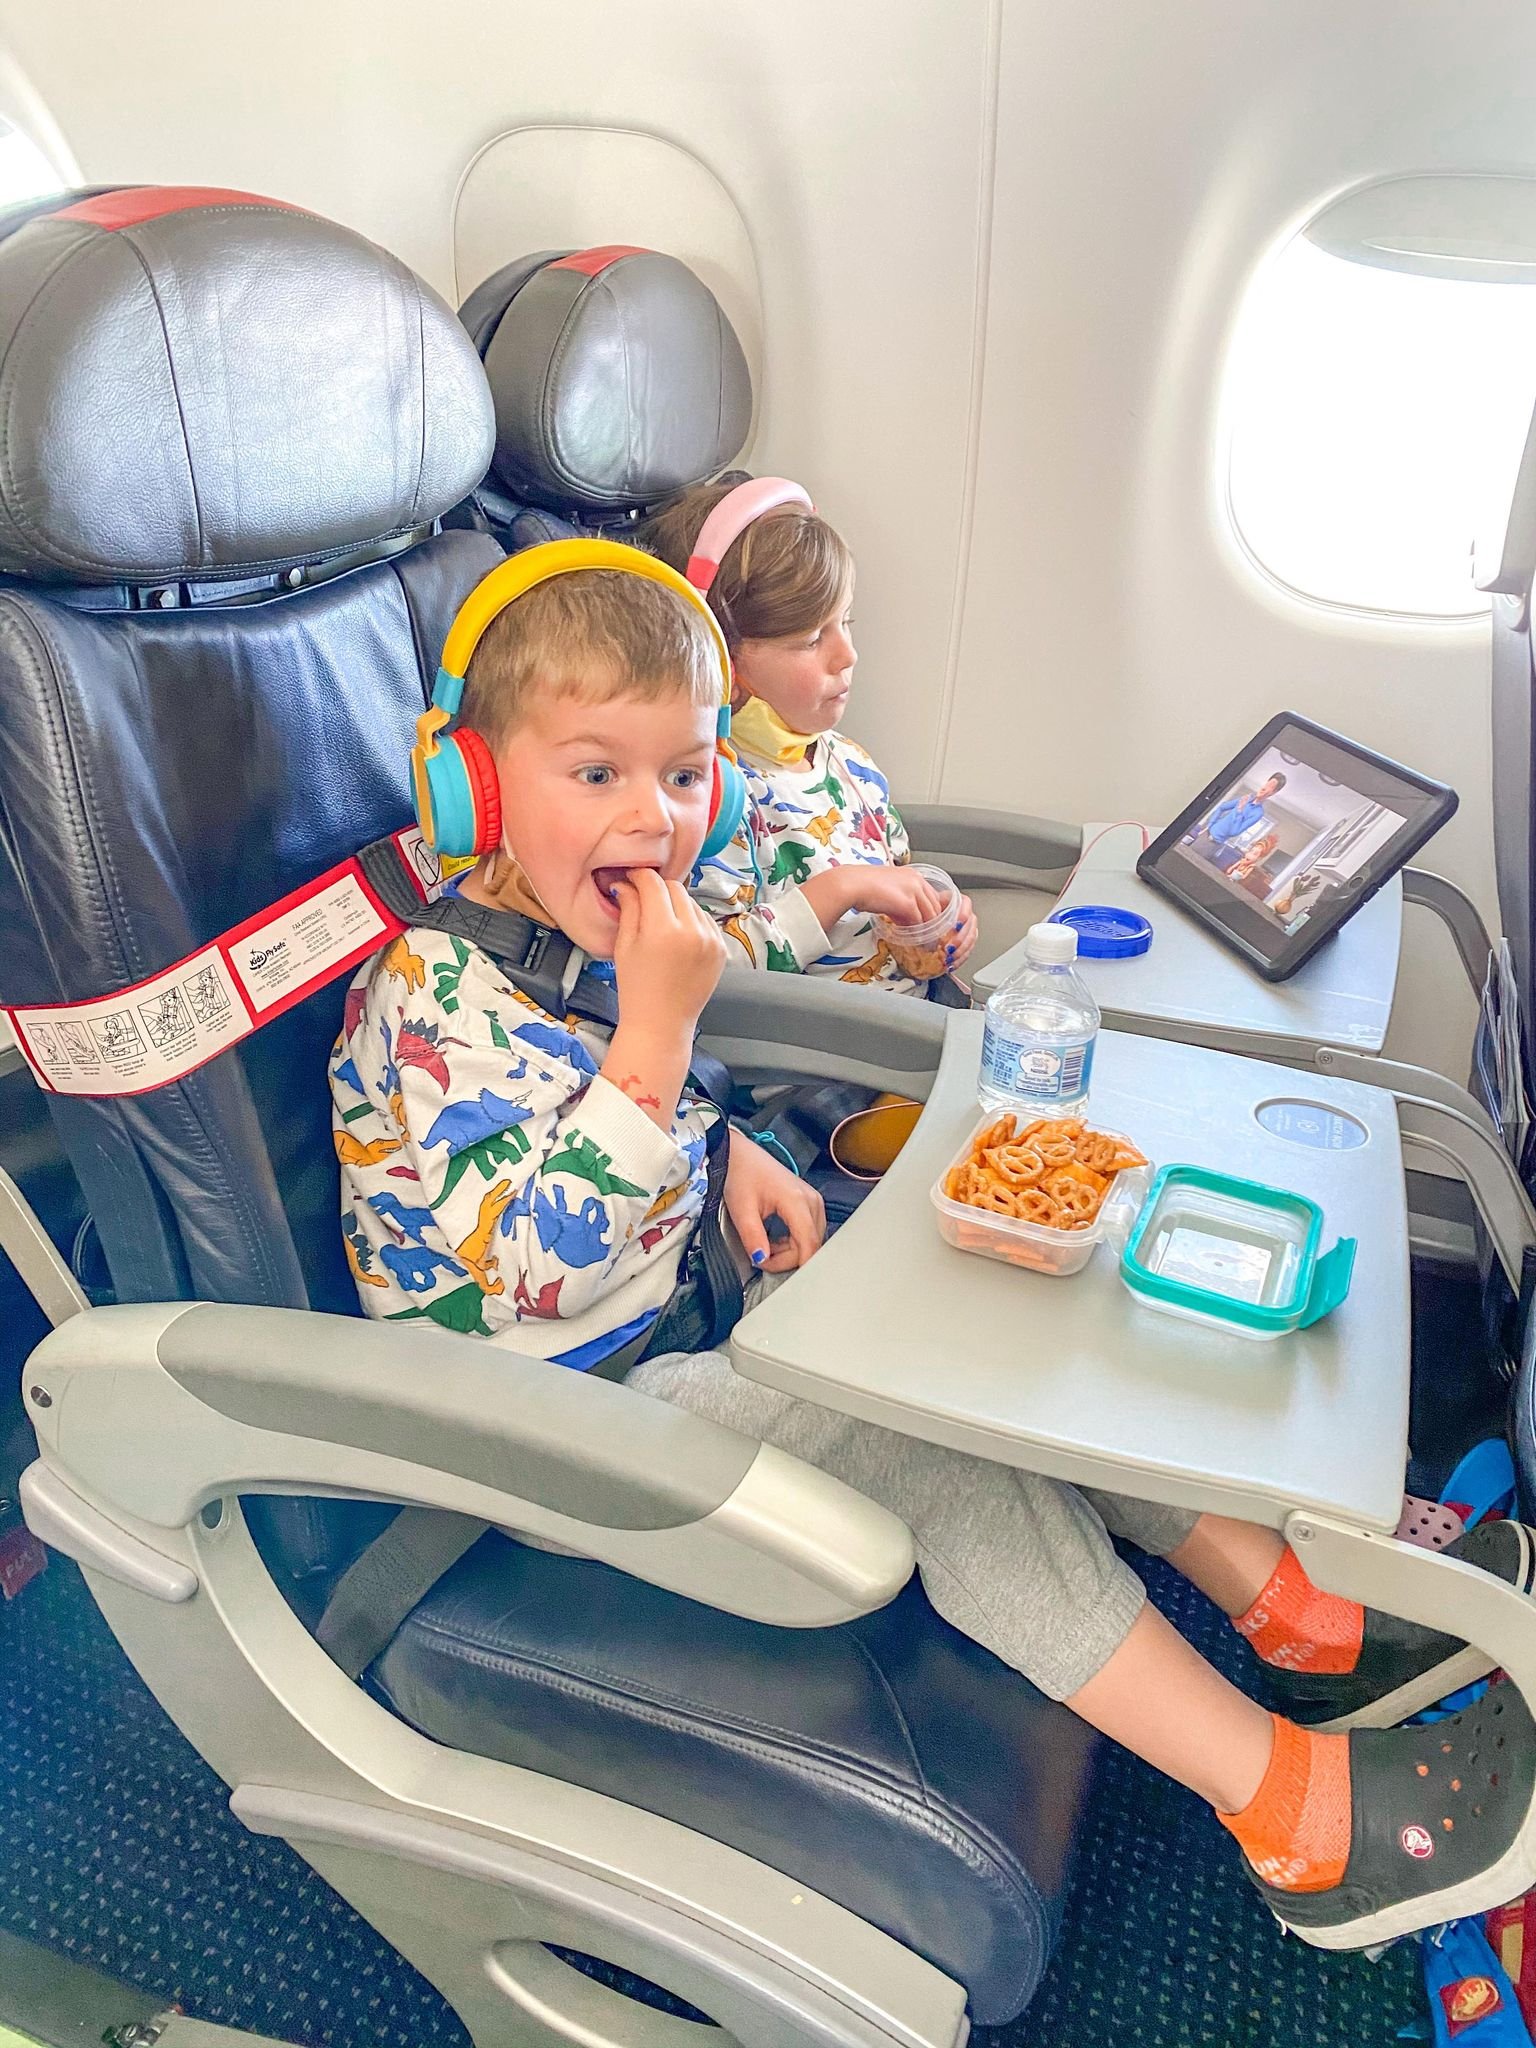 Activities for toddler on plane: mum and pediatrician shares 12